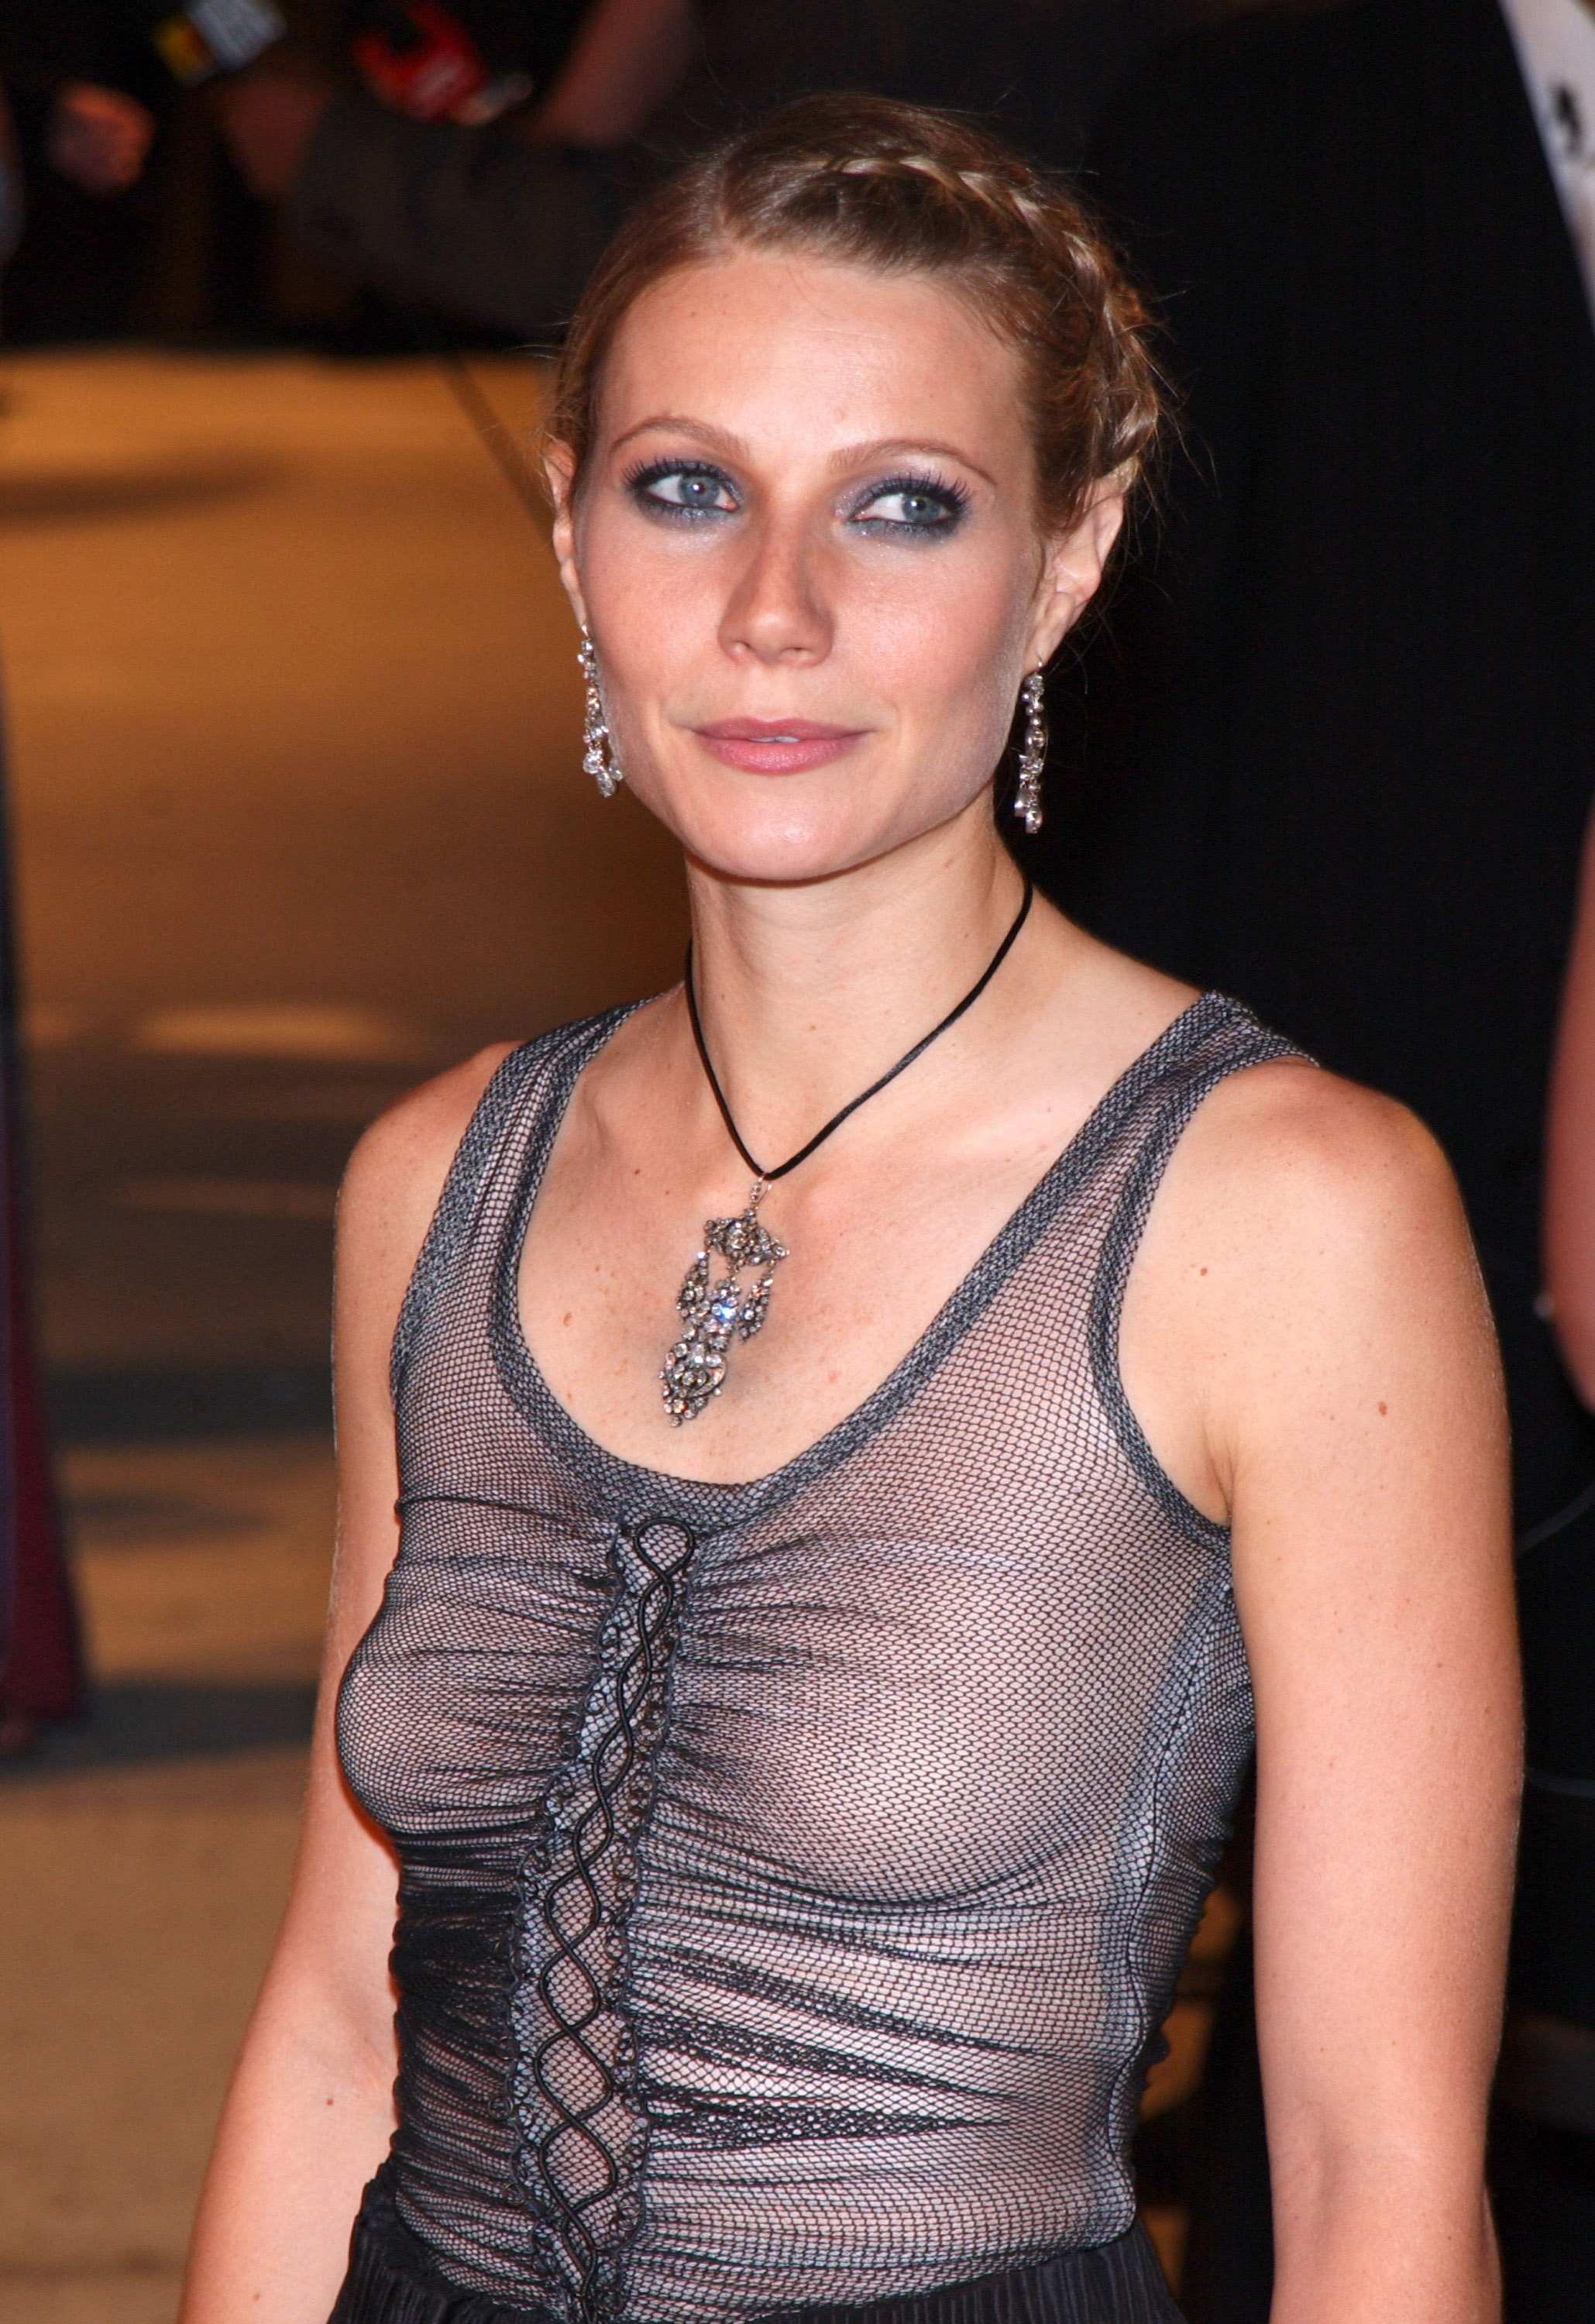 Gwyneth Paltrow attending the 2002 Vanity Fair Oscar Party in Beverly Hills | Source: Getty Images